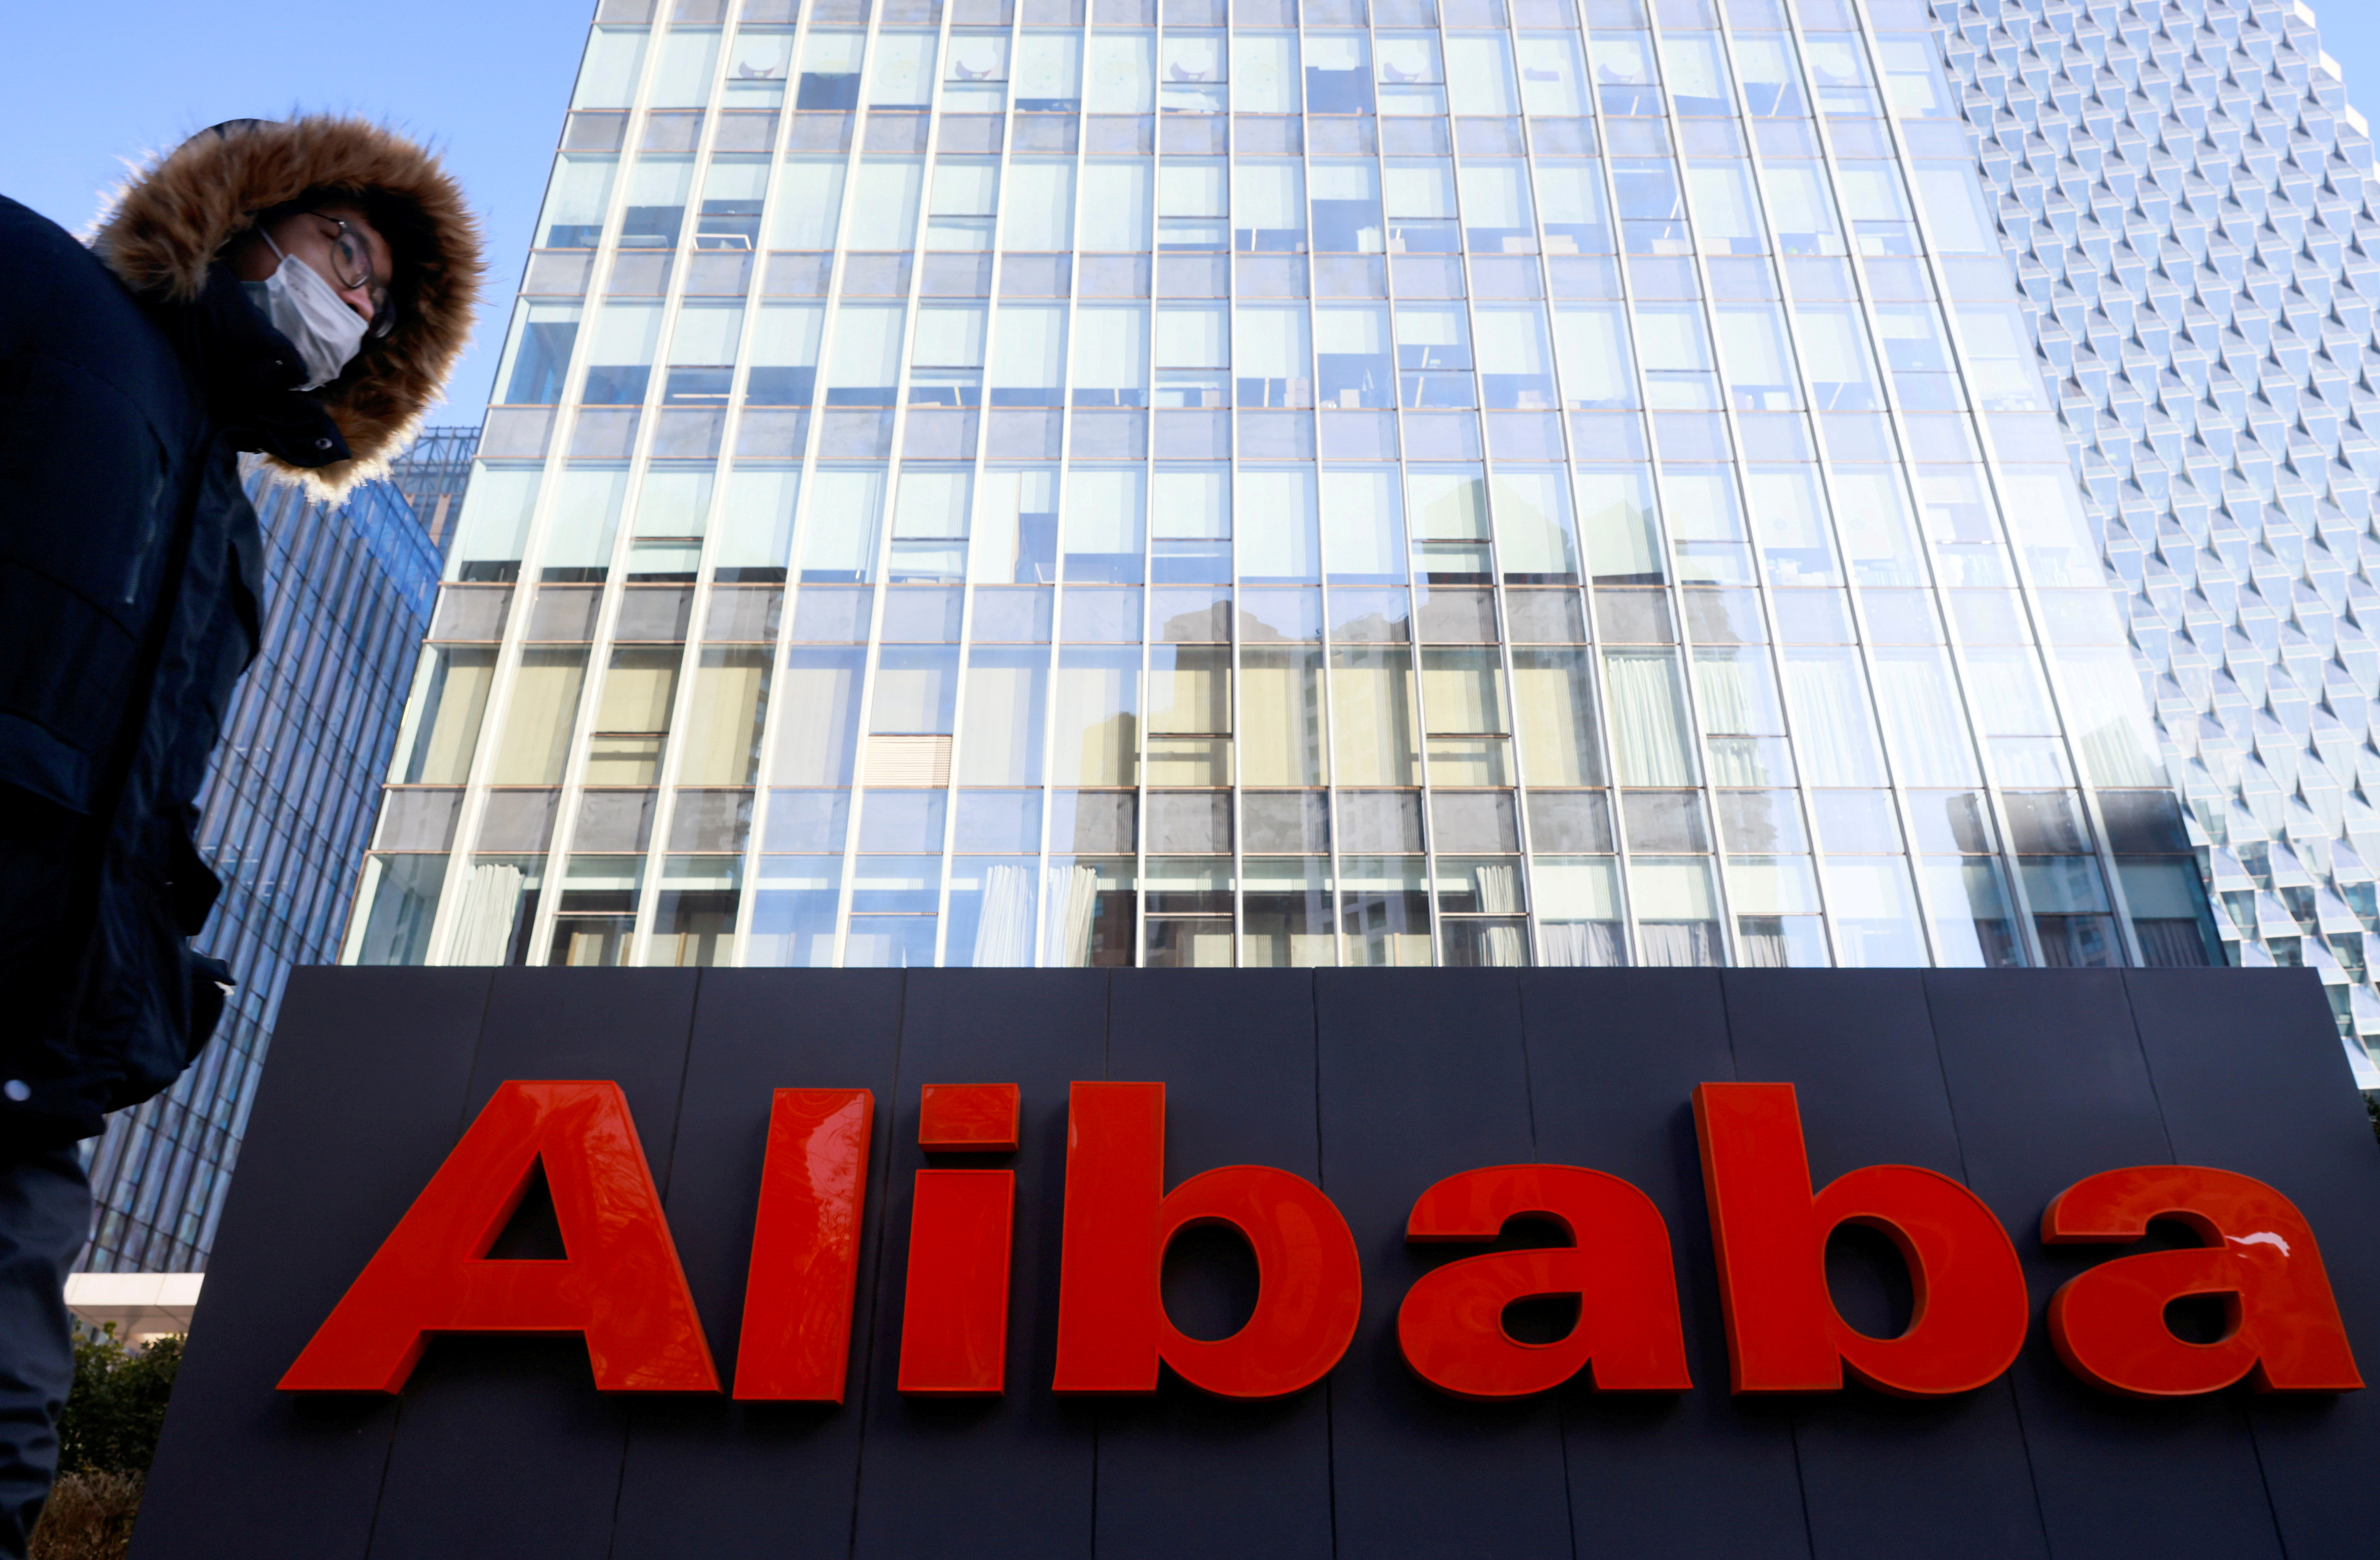 The logo of Alibaba Group is seen at its office in Beijing, China January 5, 2021. REUTERS/Thomas Peter/File Photo